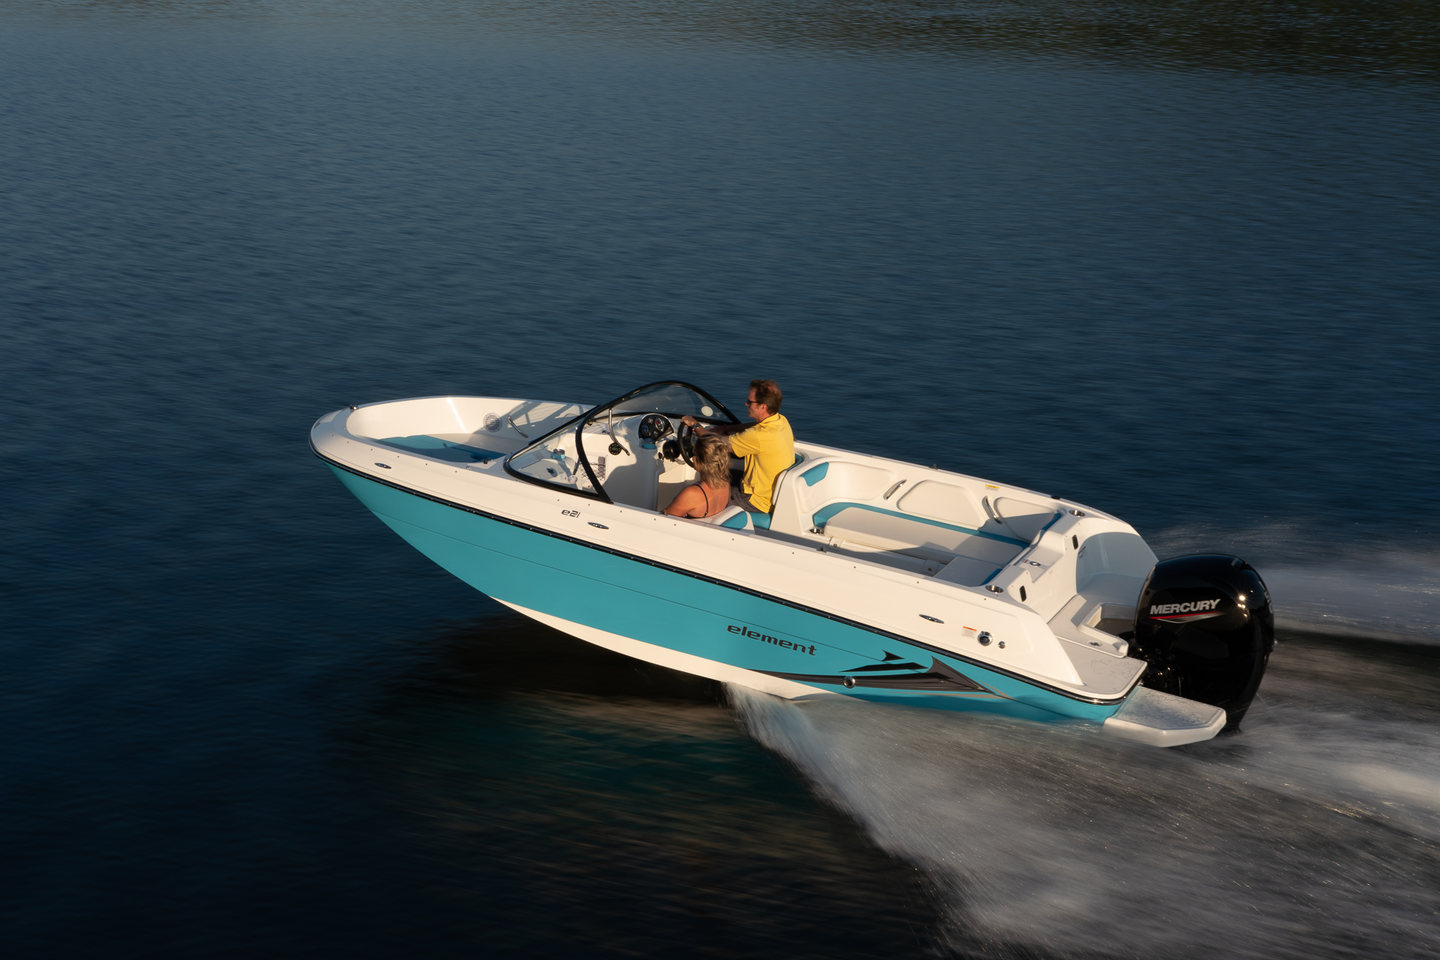 360 VR Virtual Tours of the Bayliner Element E21